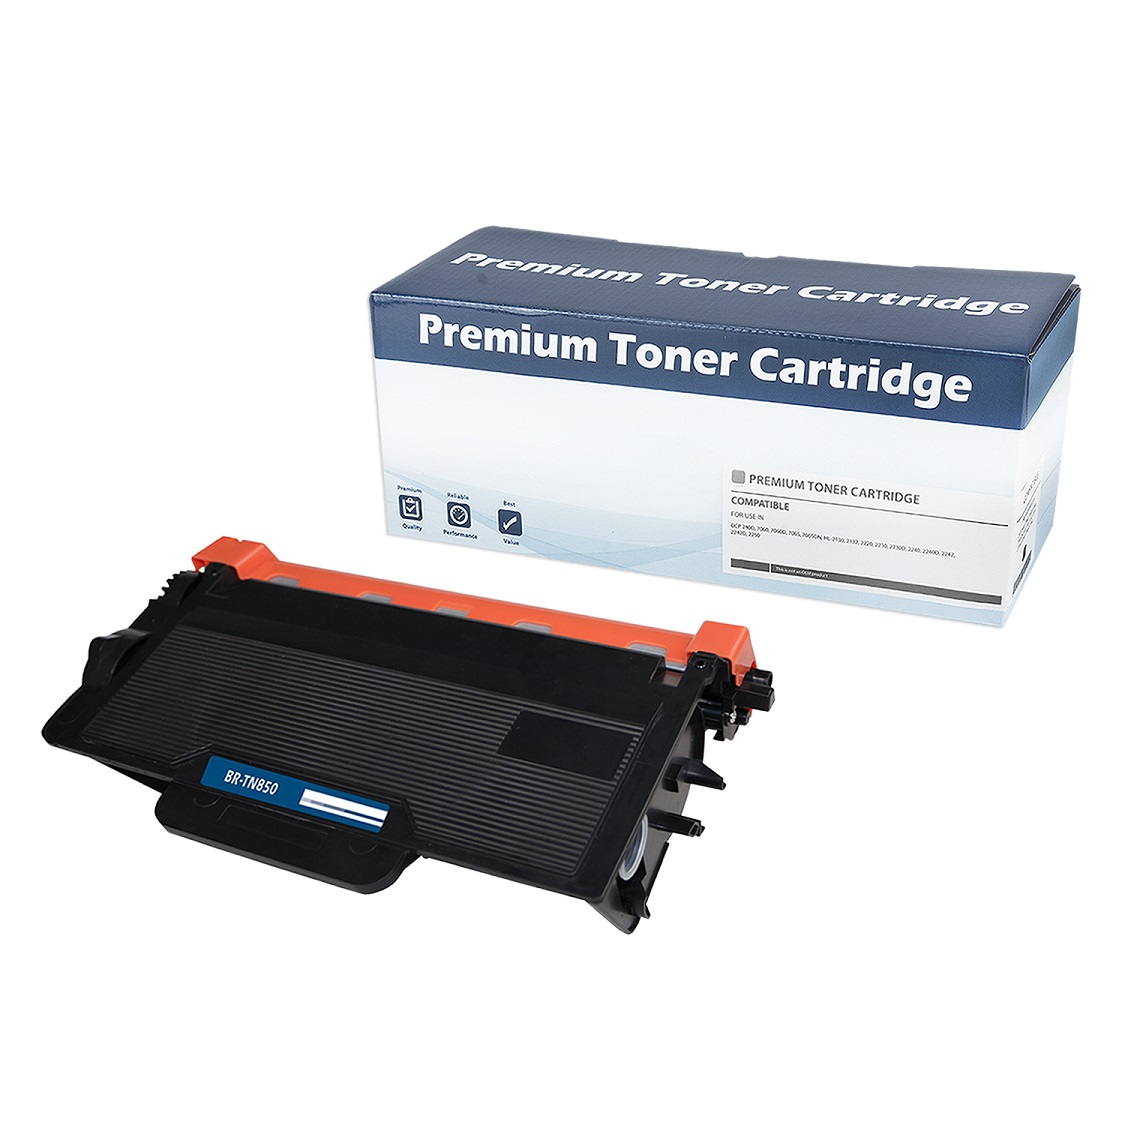 COMPATIBLE BROTHER TN850 TONER CTG, BLACK, 8K HIGH YIELD